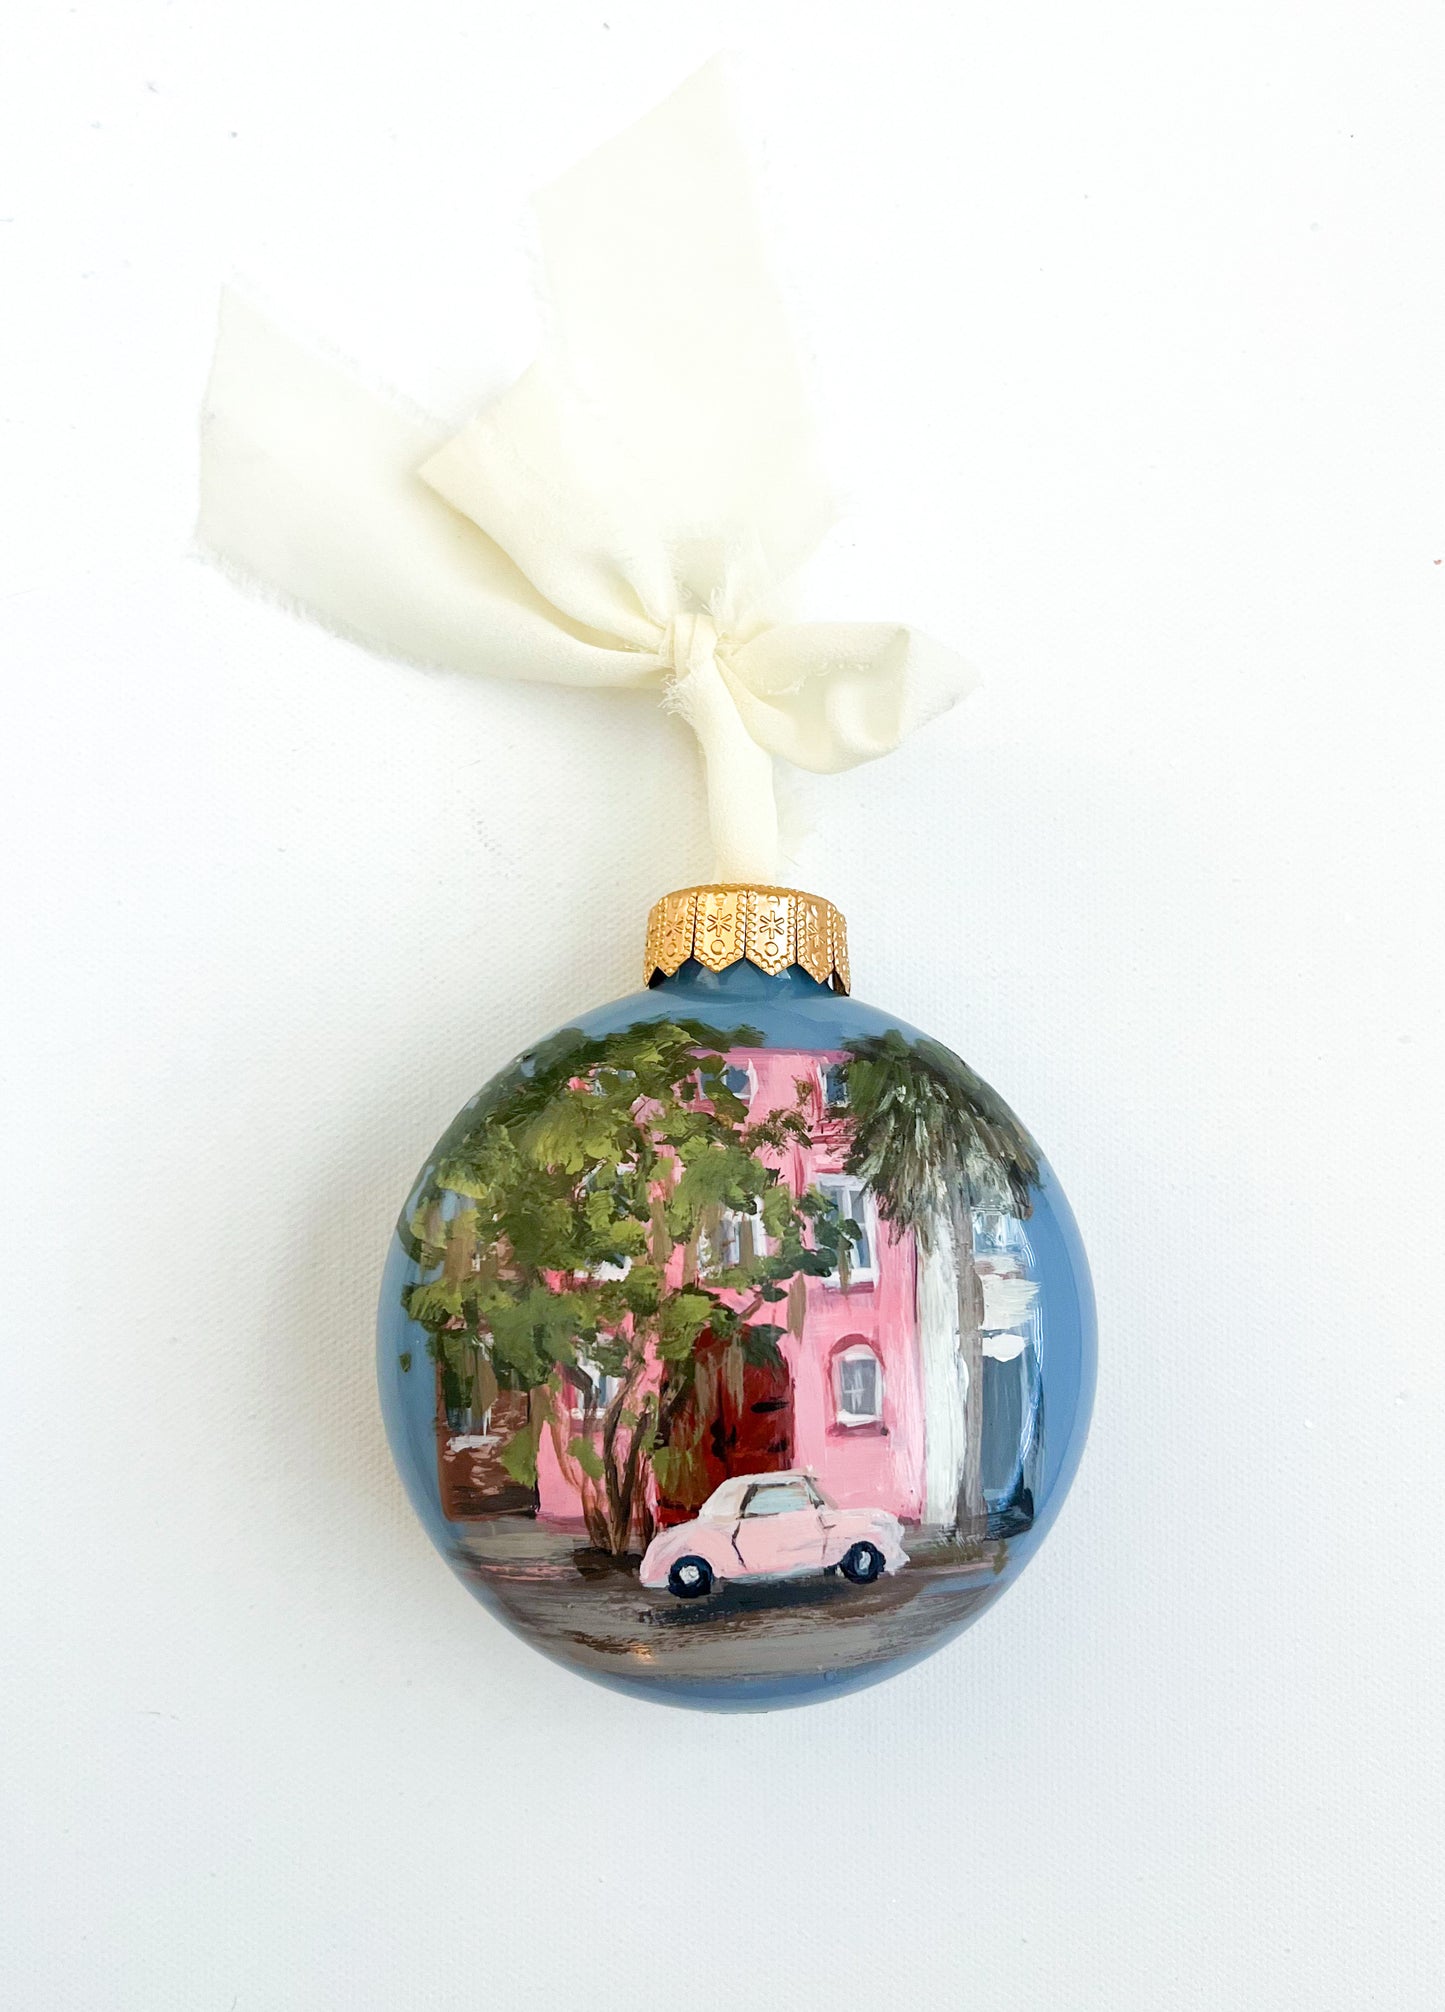 The Pink Figgy Ornament #32